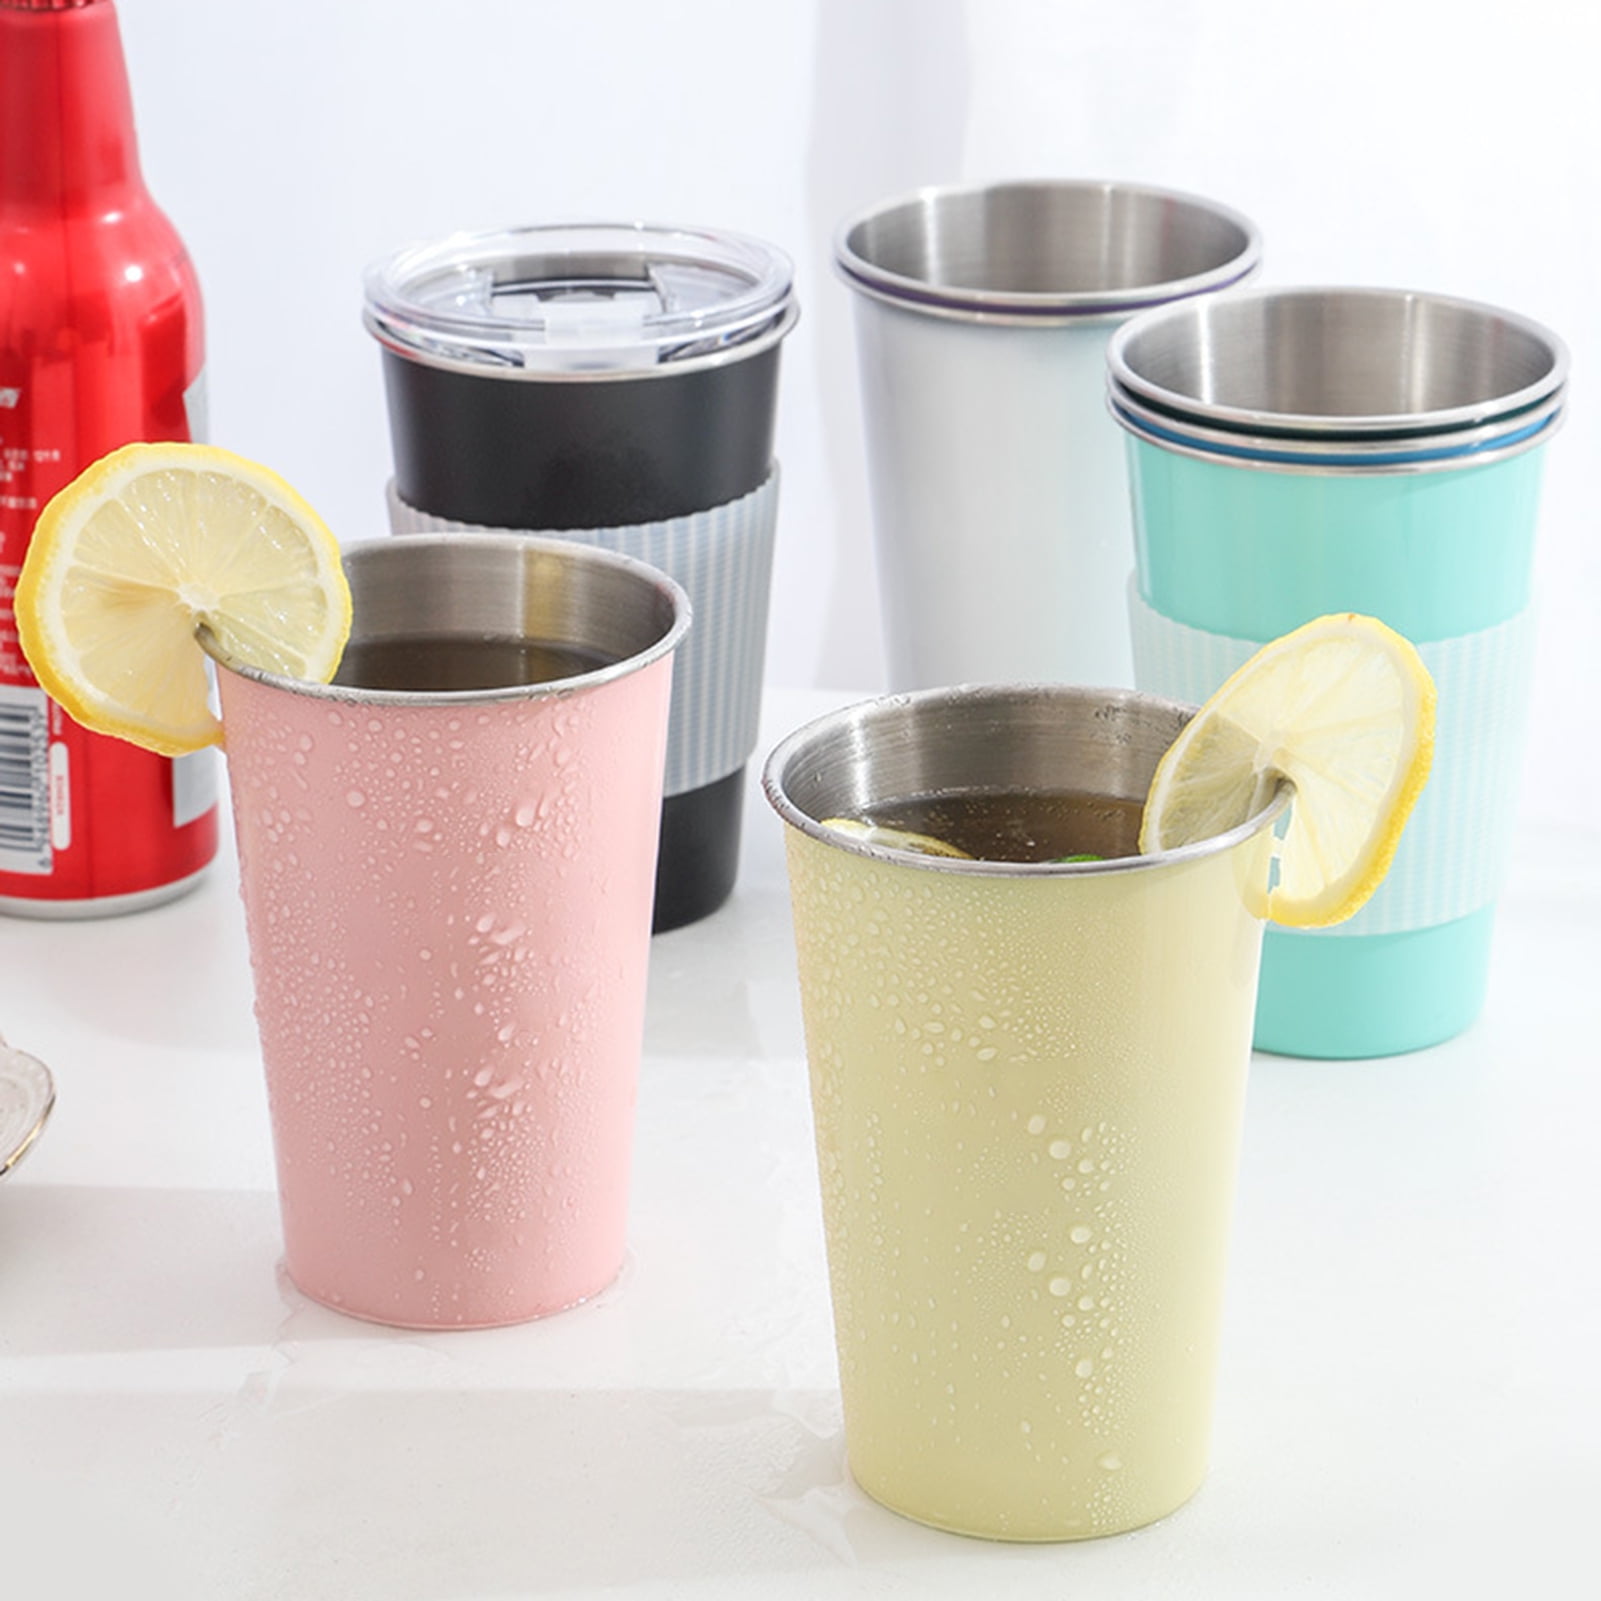 Bullet SM-6656 - Cyclone 16oz Tumbler with Straw $3.41 - Drinkware